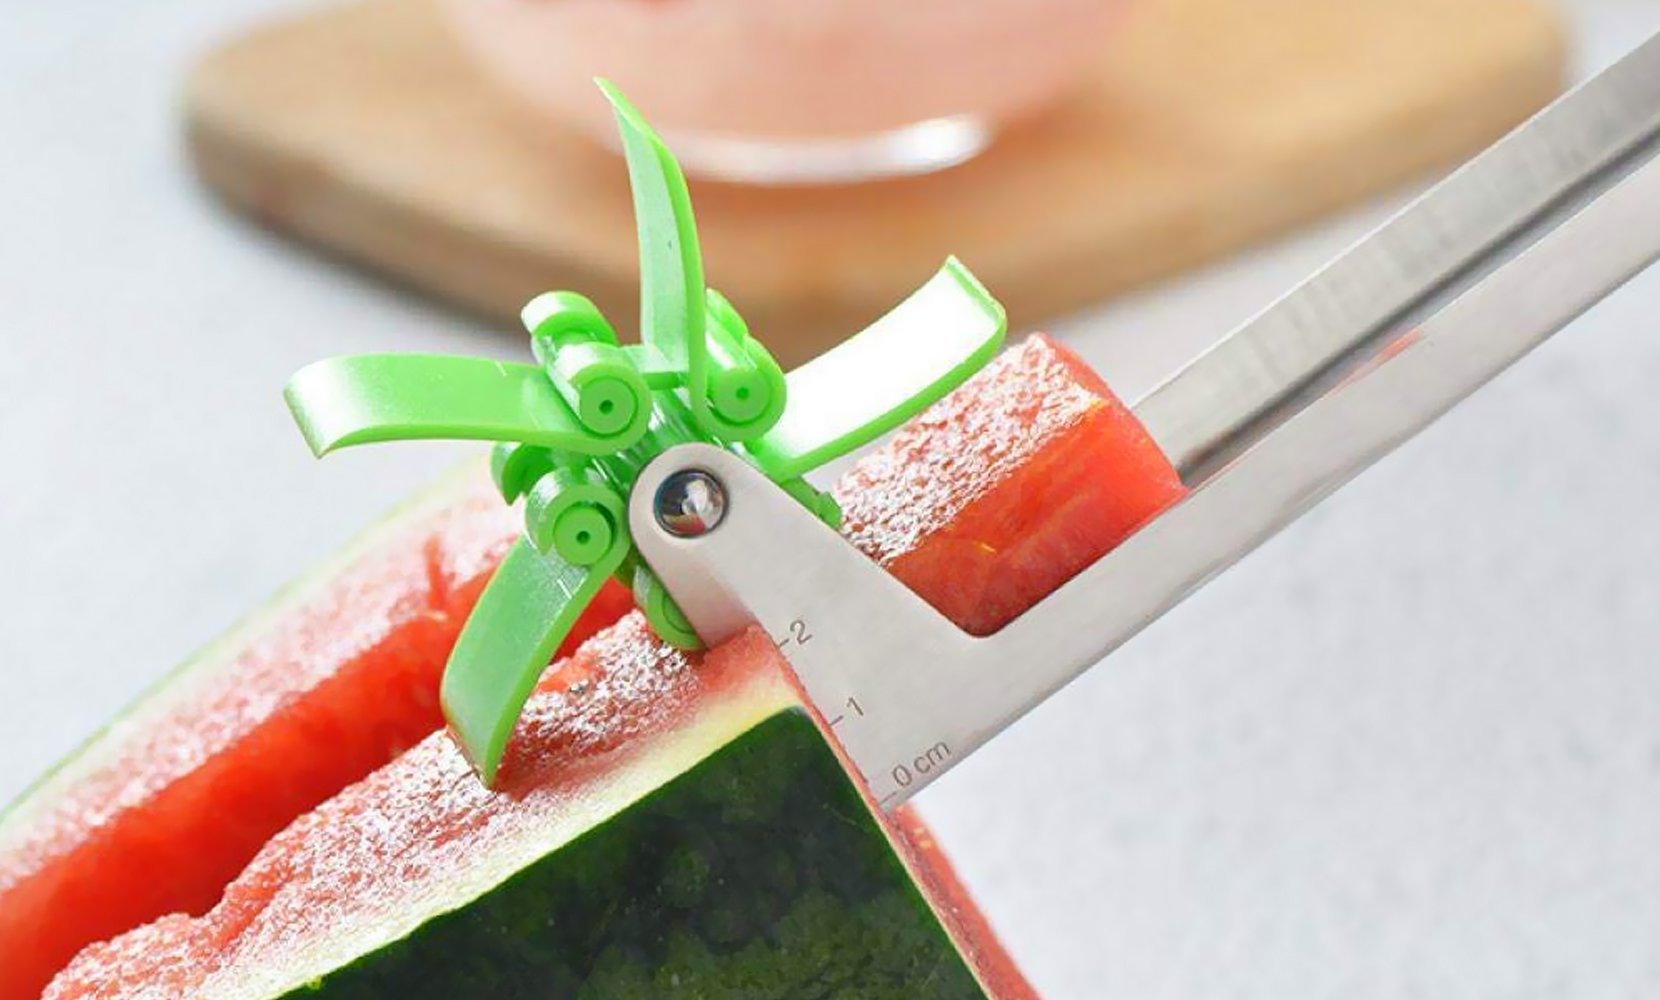 Mess-Free Windmill Watermelon Cutter and Cuber